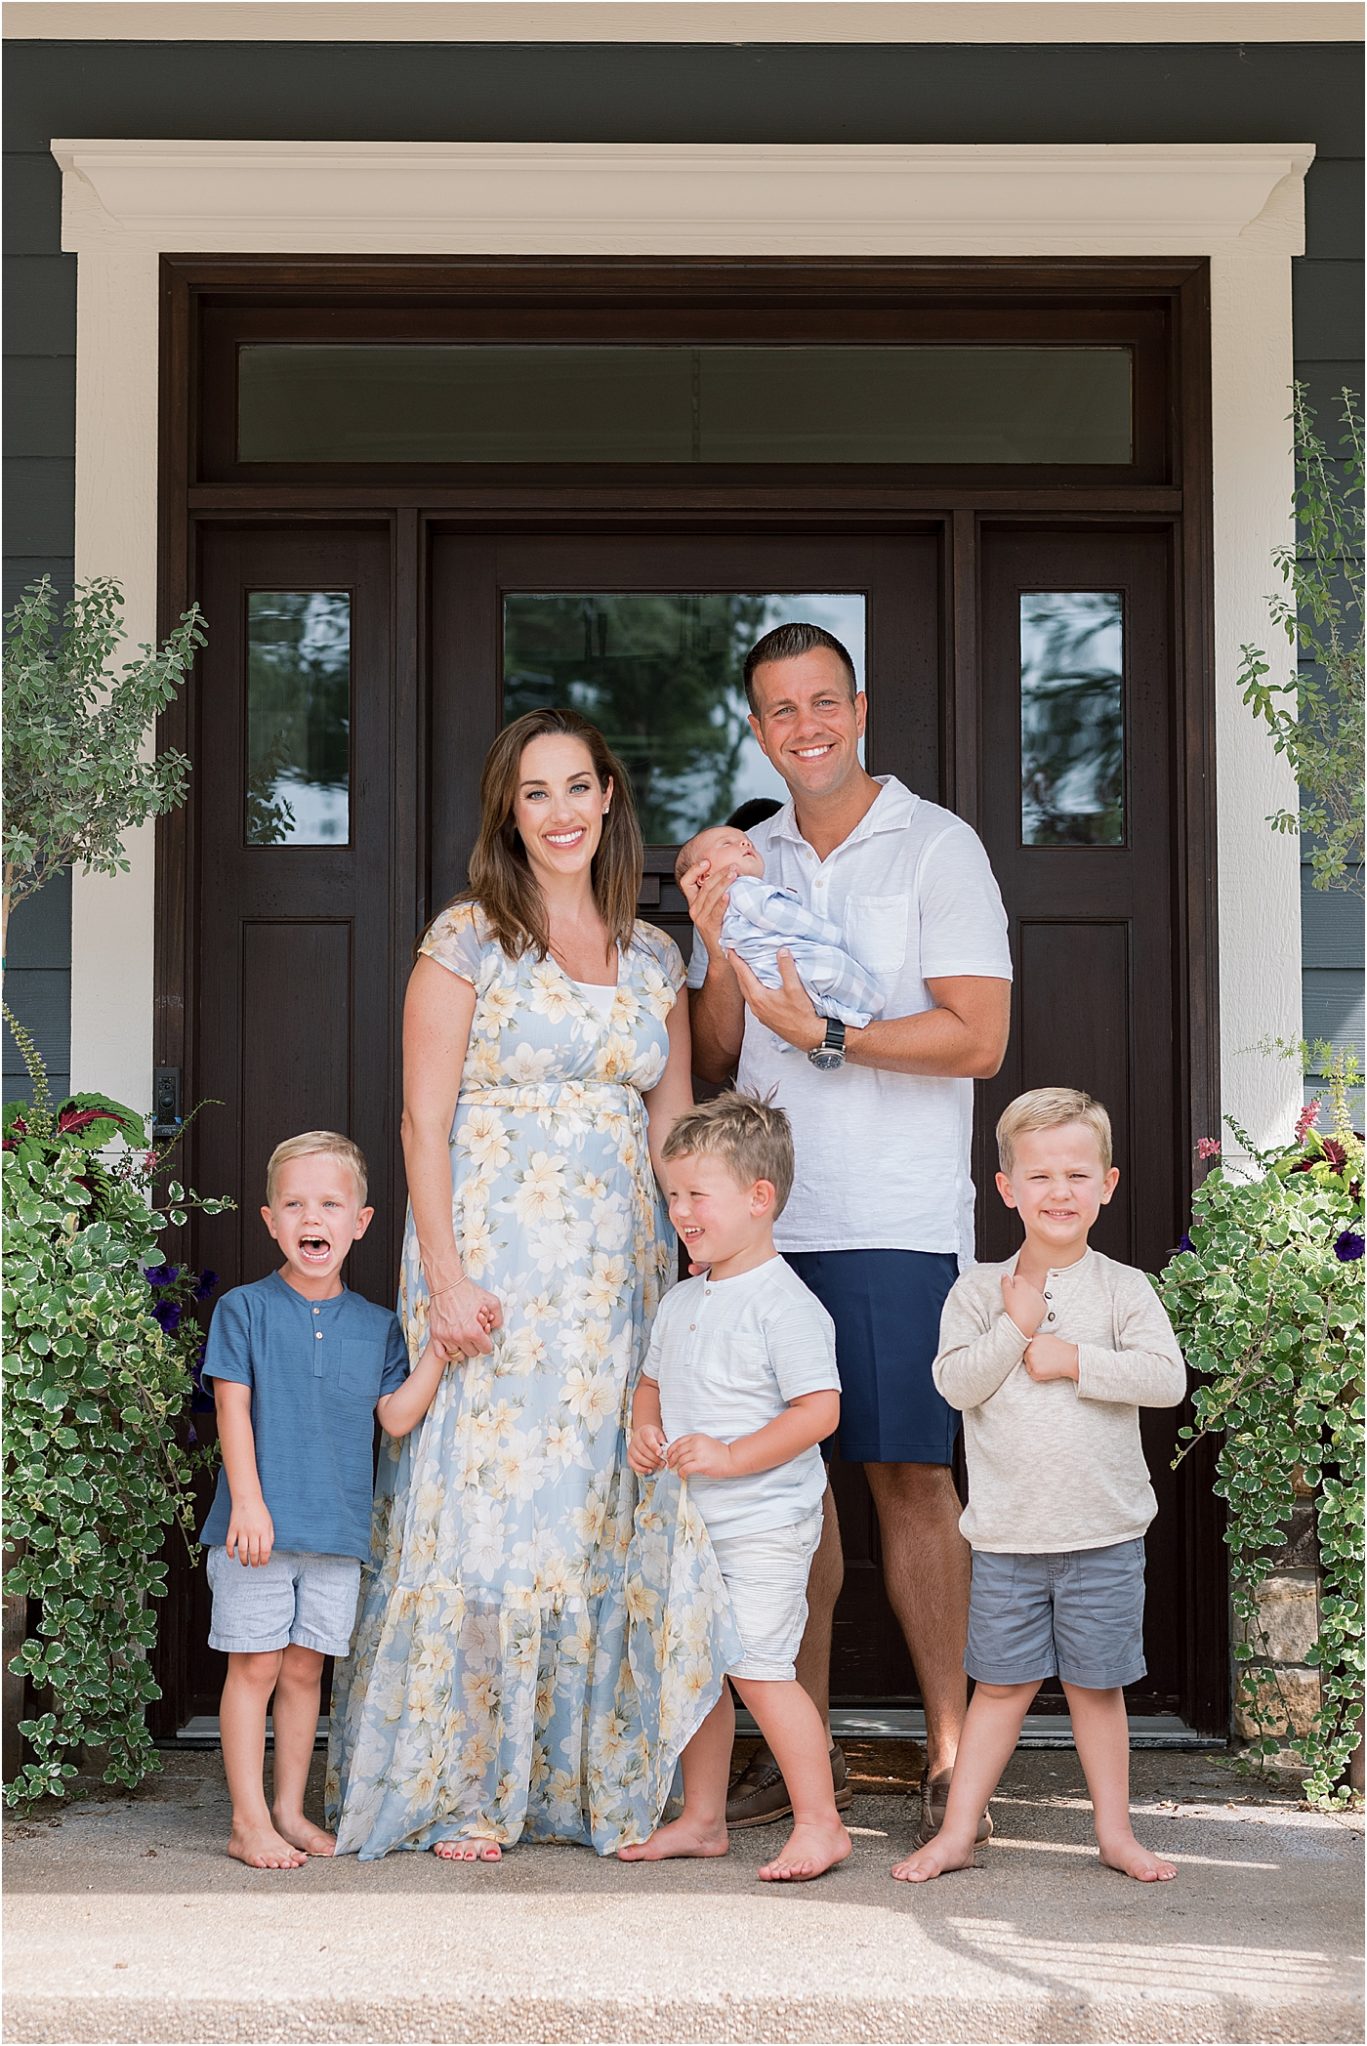 Family outside their home in Carmel Indiana for newborn session with Lindsay Konopa Photography.